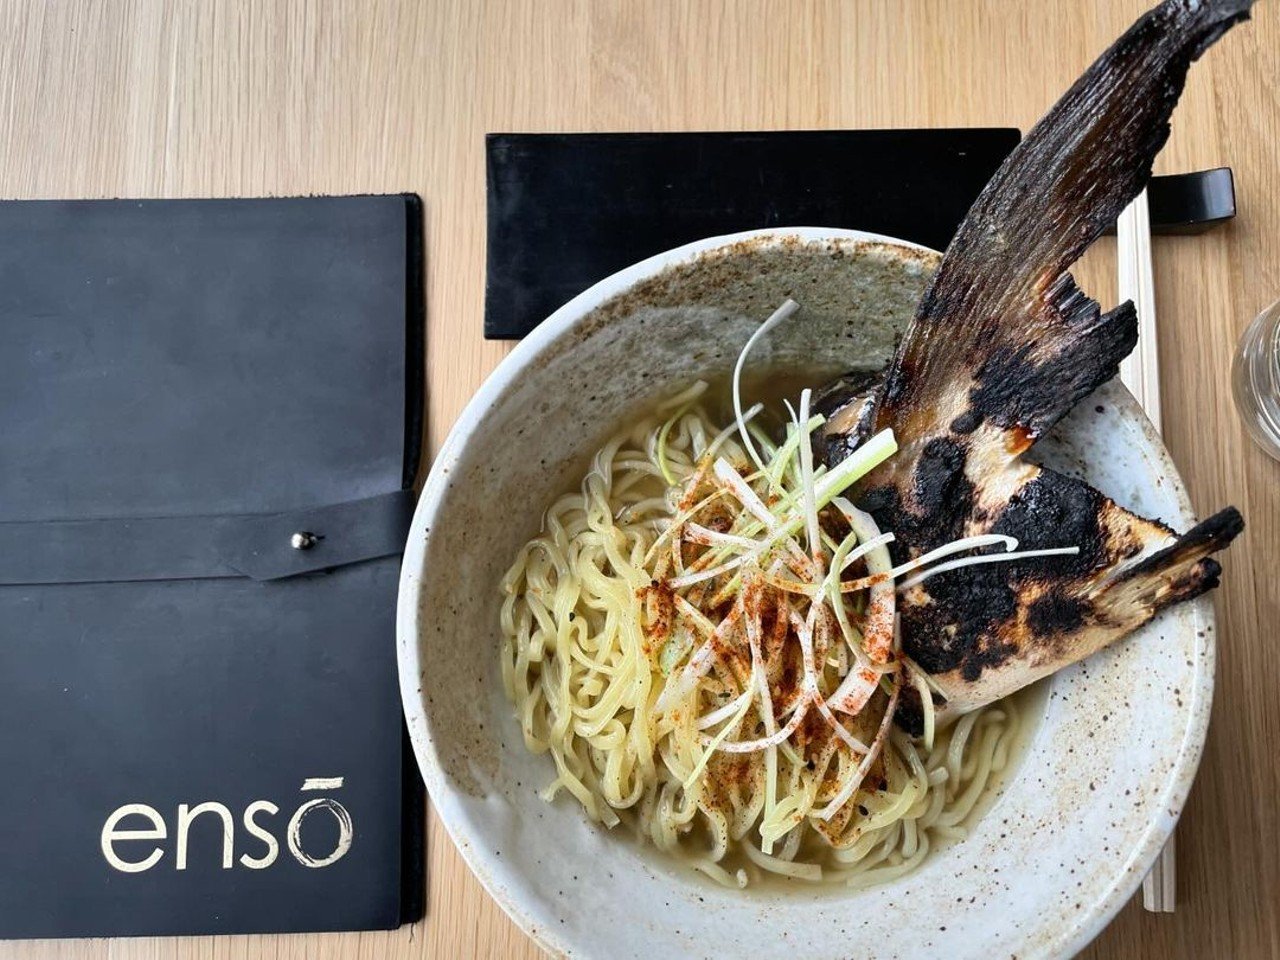 Enso1756 Frankfort Ave.Enso is a new concept from the James Beard nominated chef behind North of Bourbon. The menu interlinks Japanese and Southern culture to create thoughtful and authentic dishes that are a unique addition to the Louisville food scene.